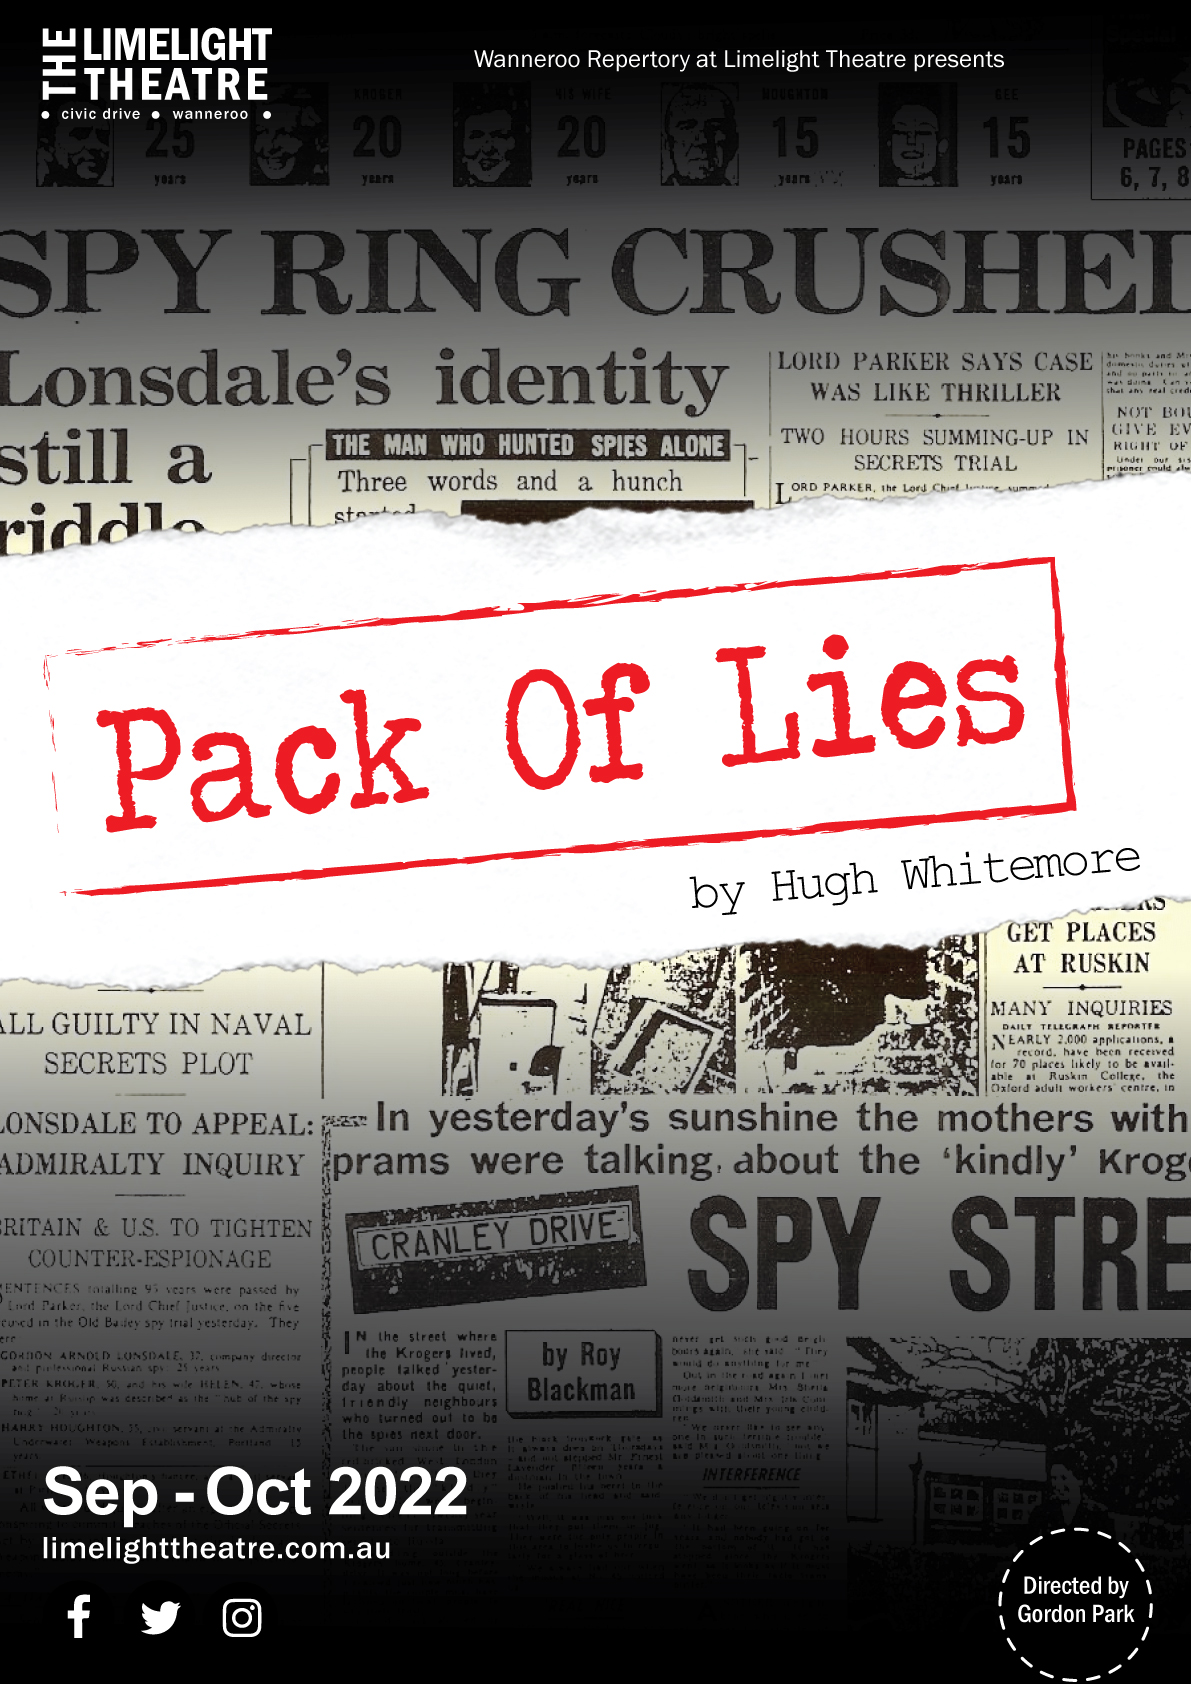 Newspaper print showing an article about a spy ring overlaid with the Pack of Lies production name and relevant dates